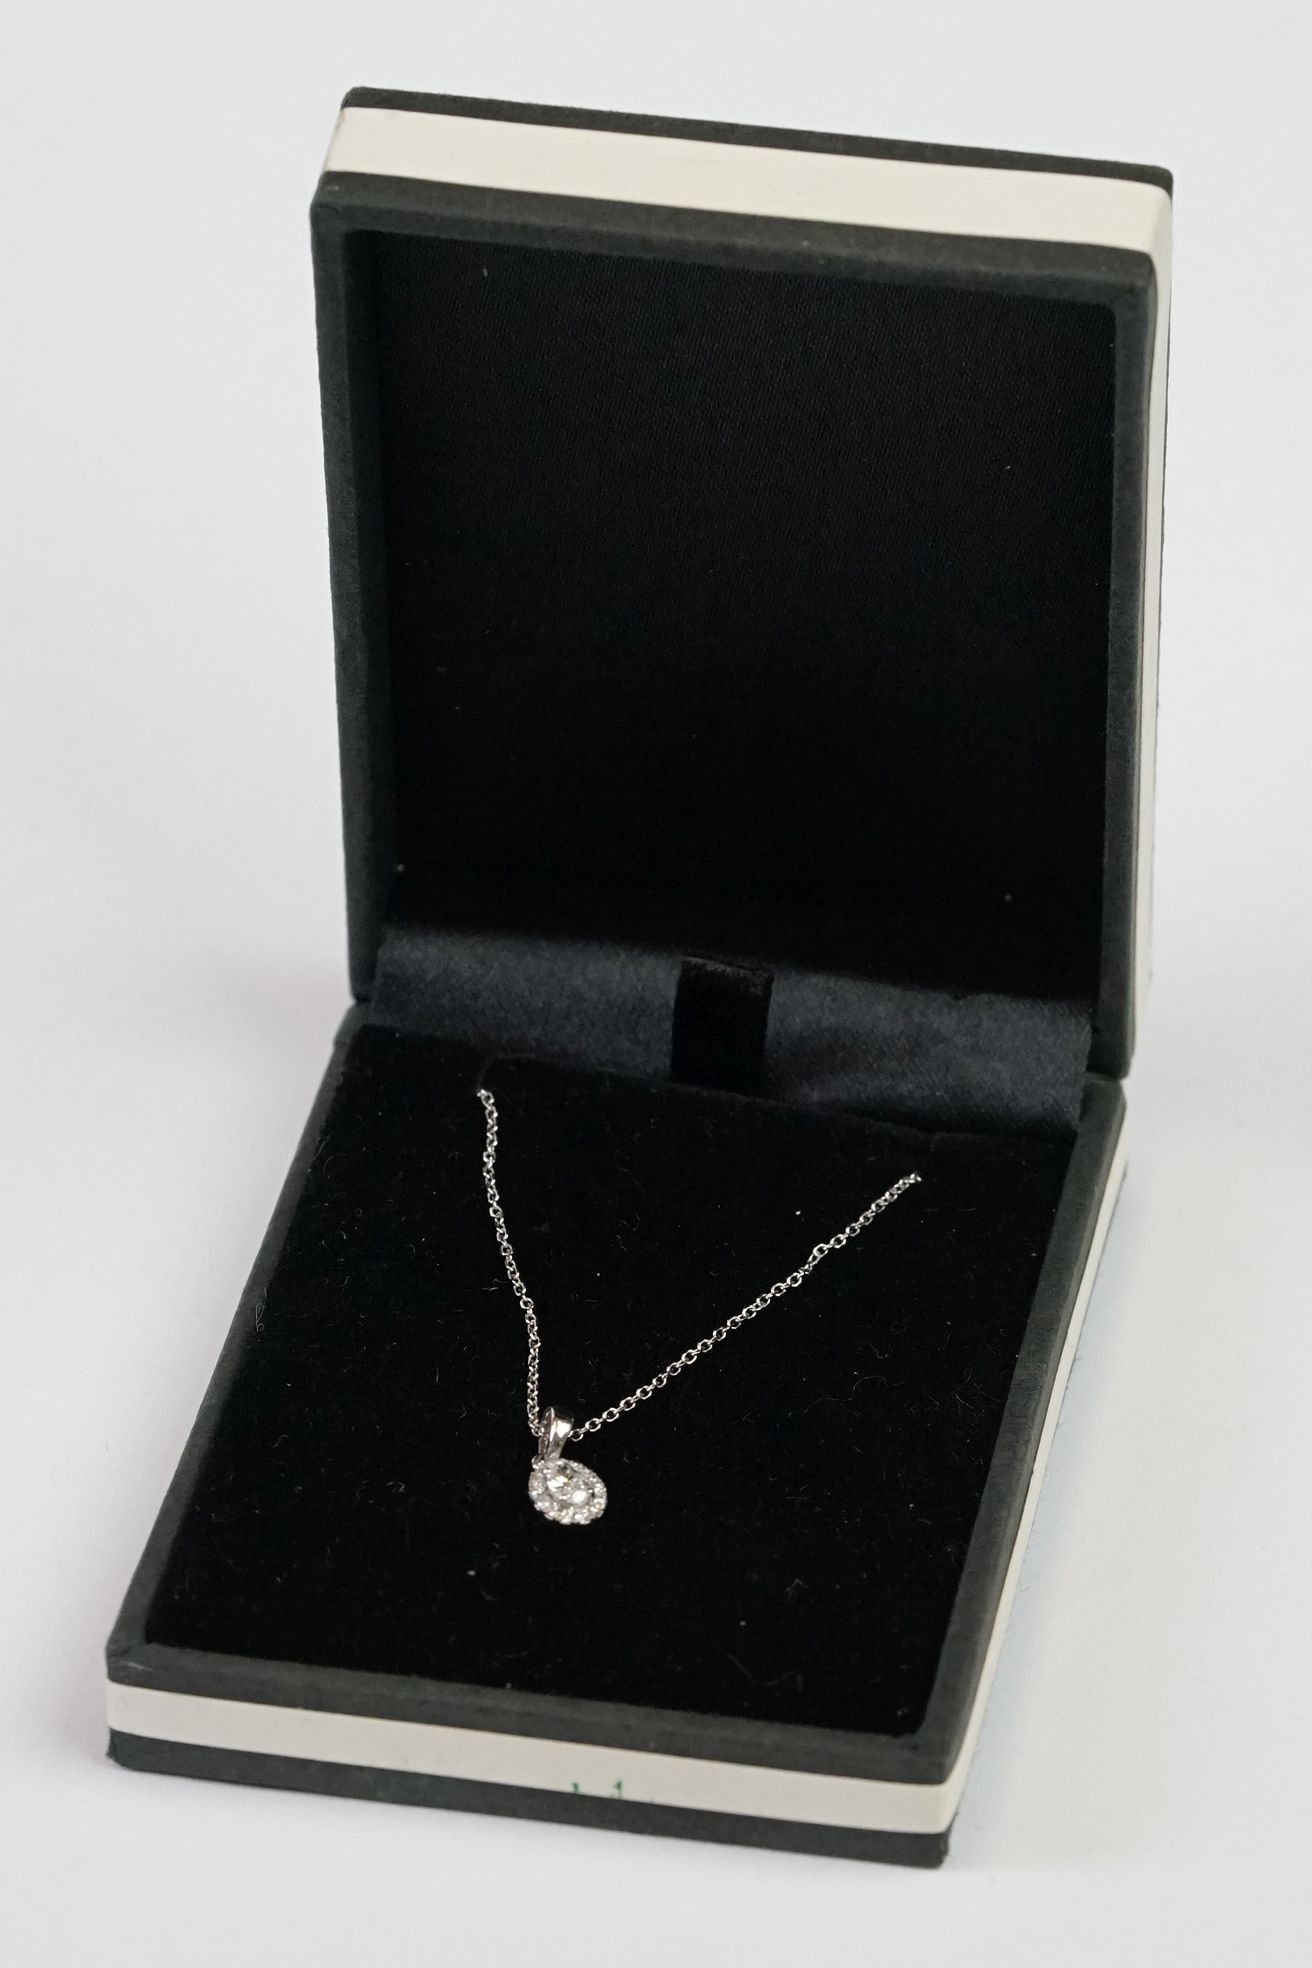 18ct White Gold Diamond Pendant of 25 points approx. total on gold chain